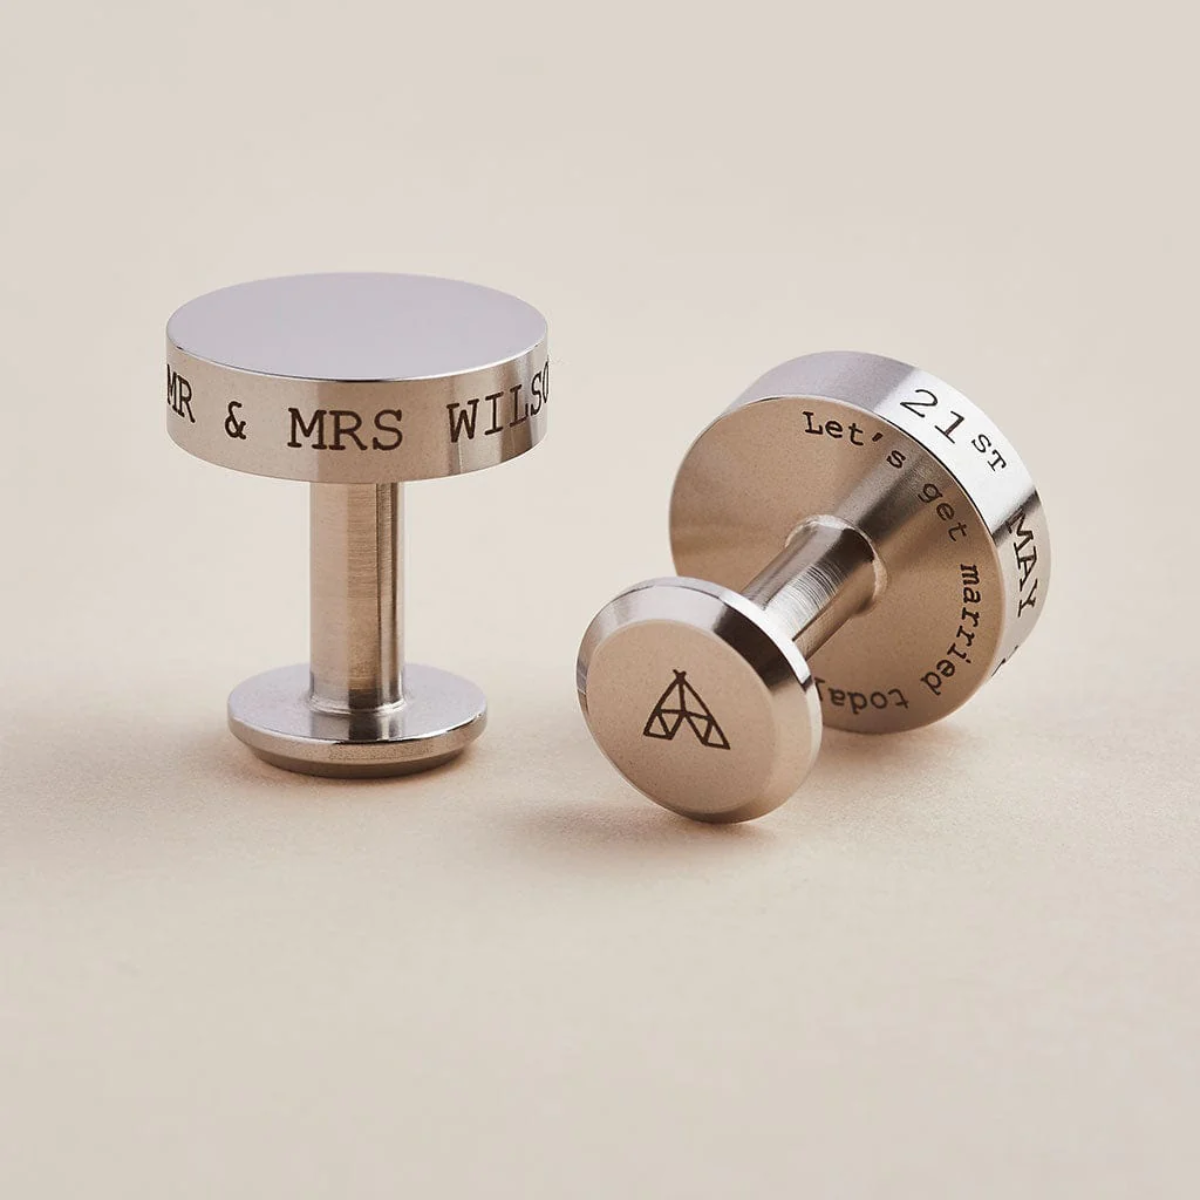 12. Timeless Elegance: Vintage-Inspired Cufflinks for a Unique Anniversary Gift Idea